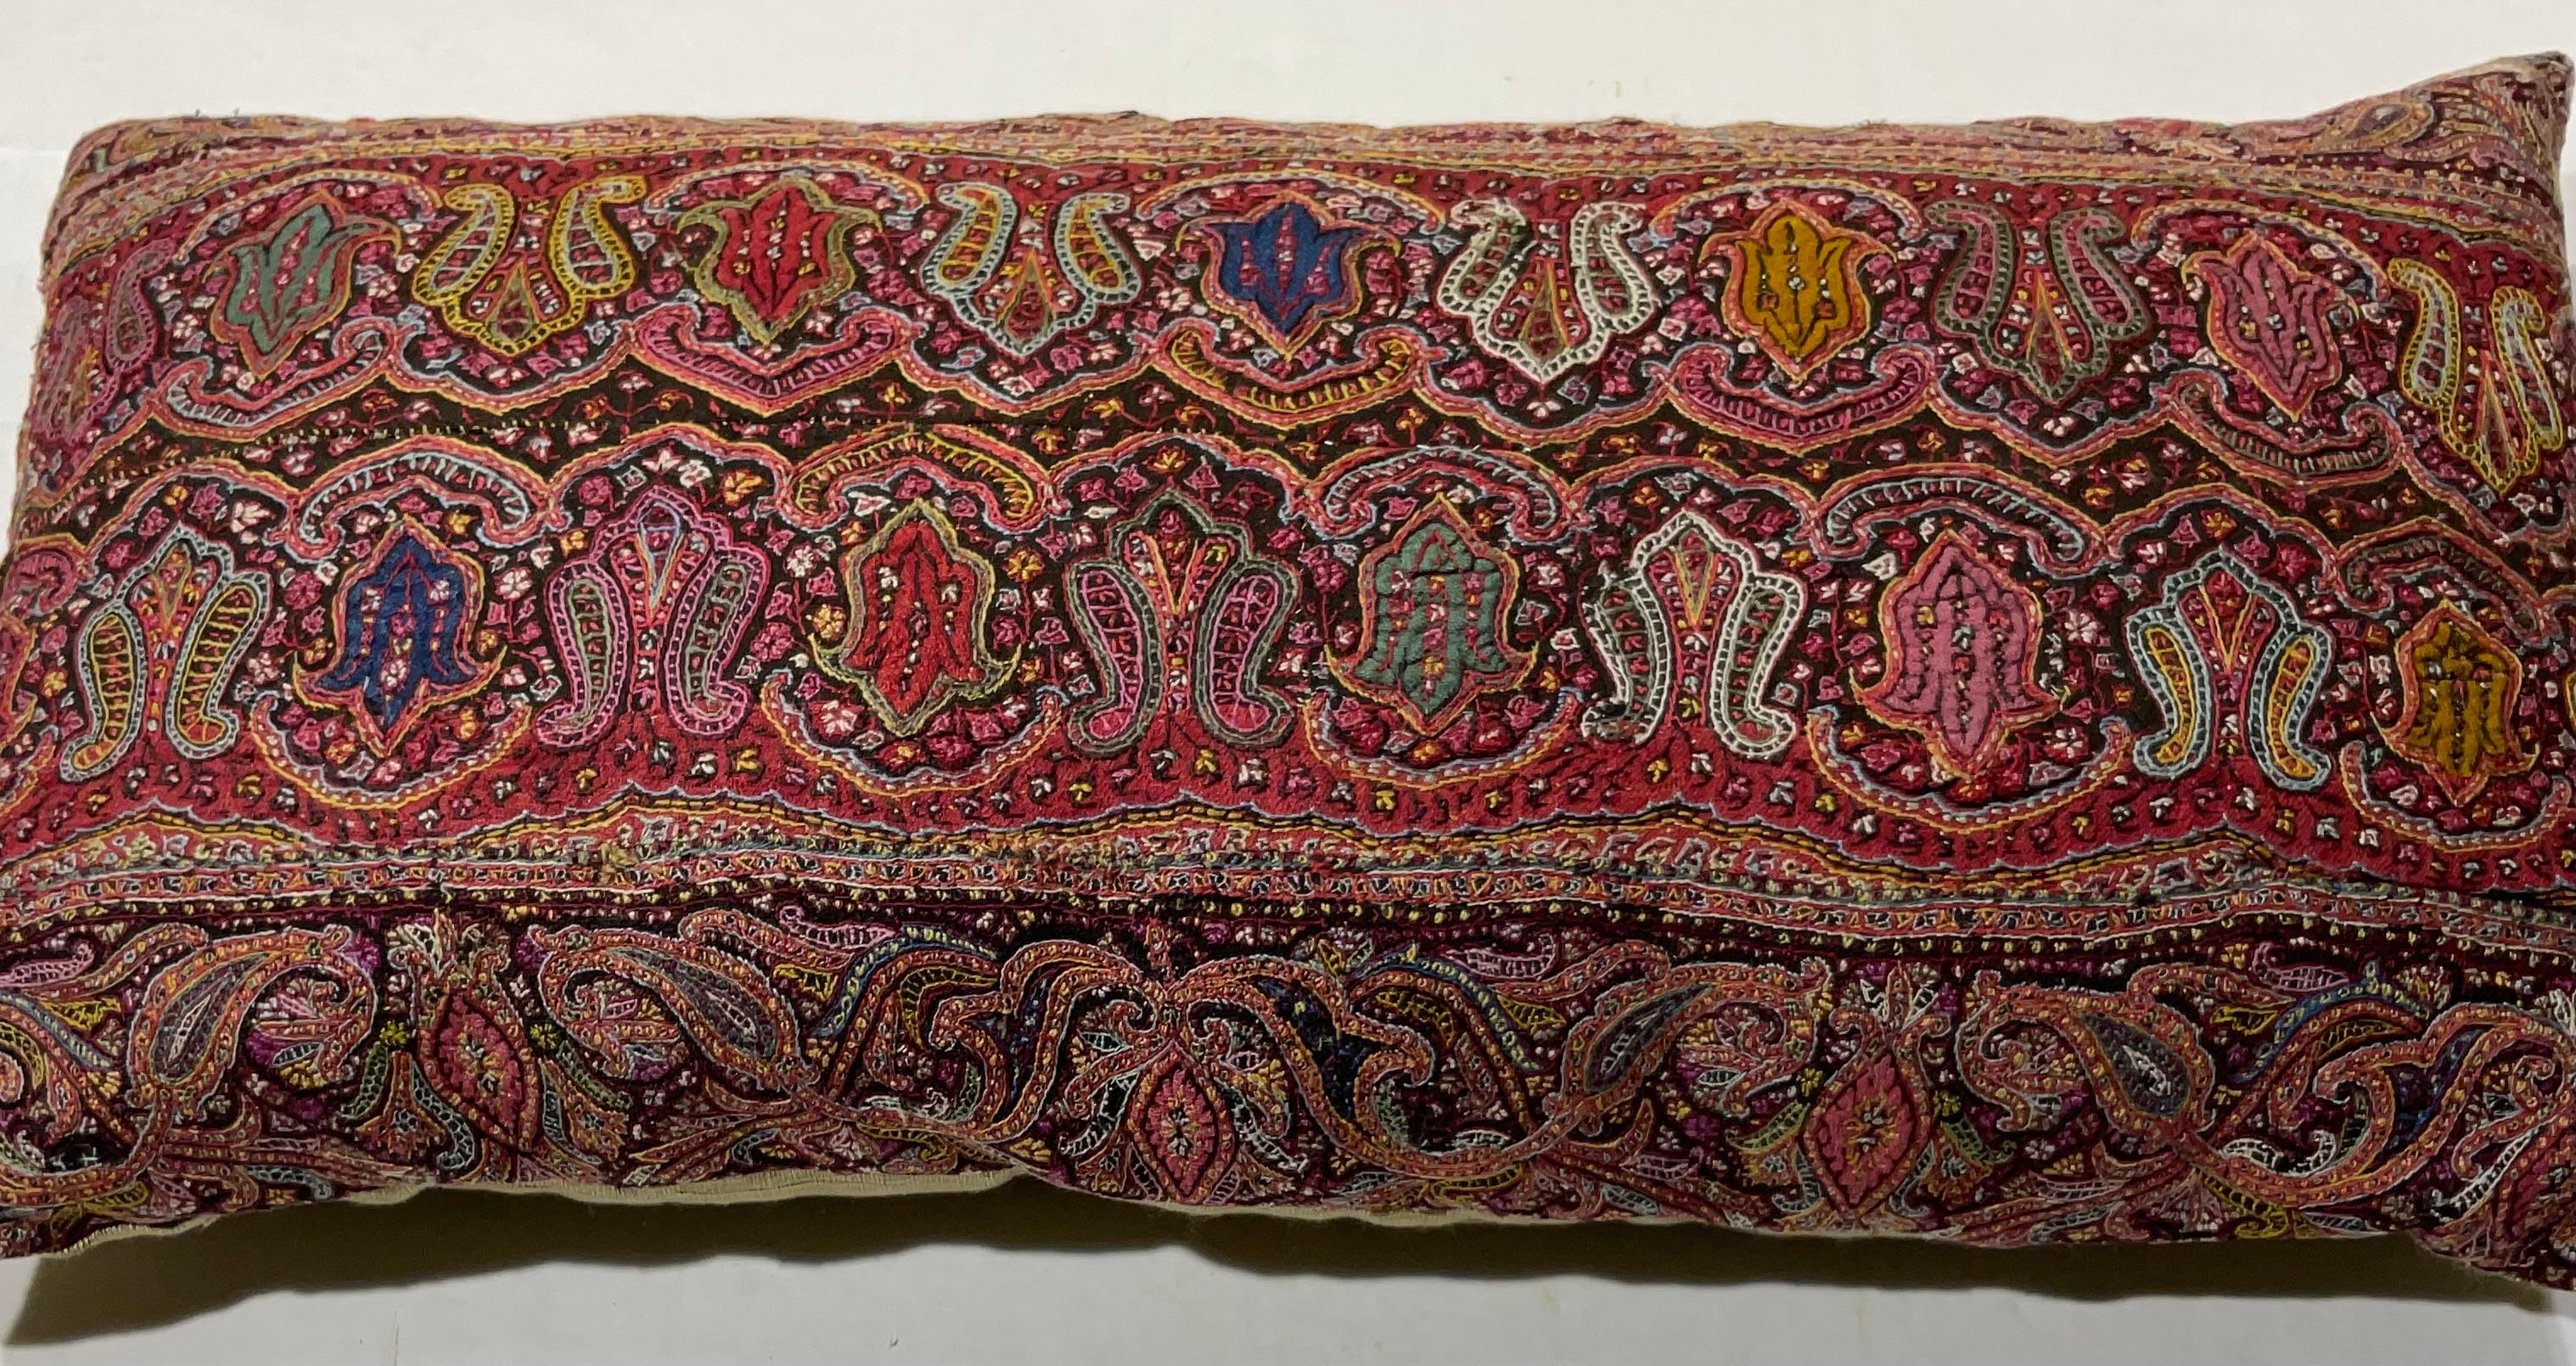 Single Hand Embroidery Persian Suzani Pillow For Sale 3